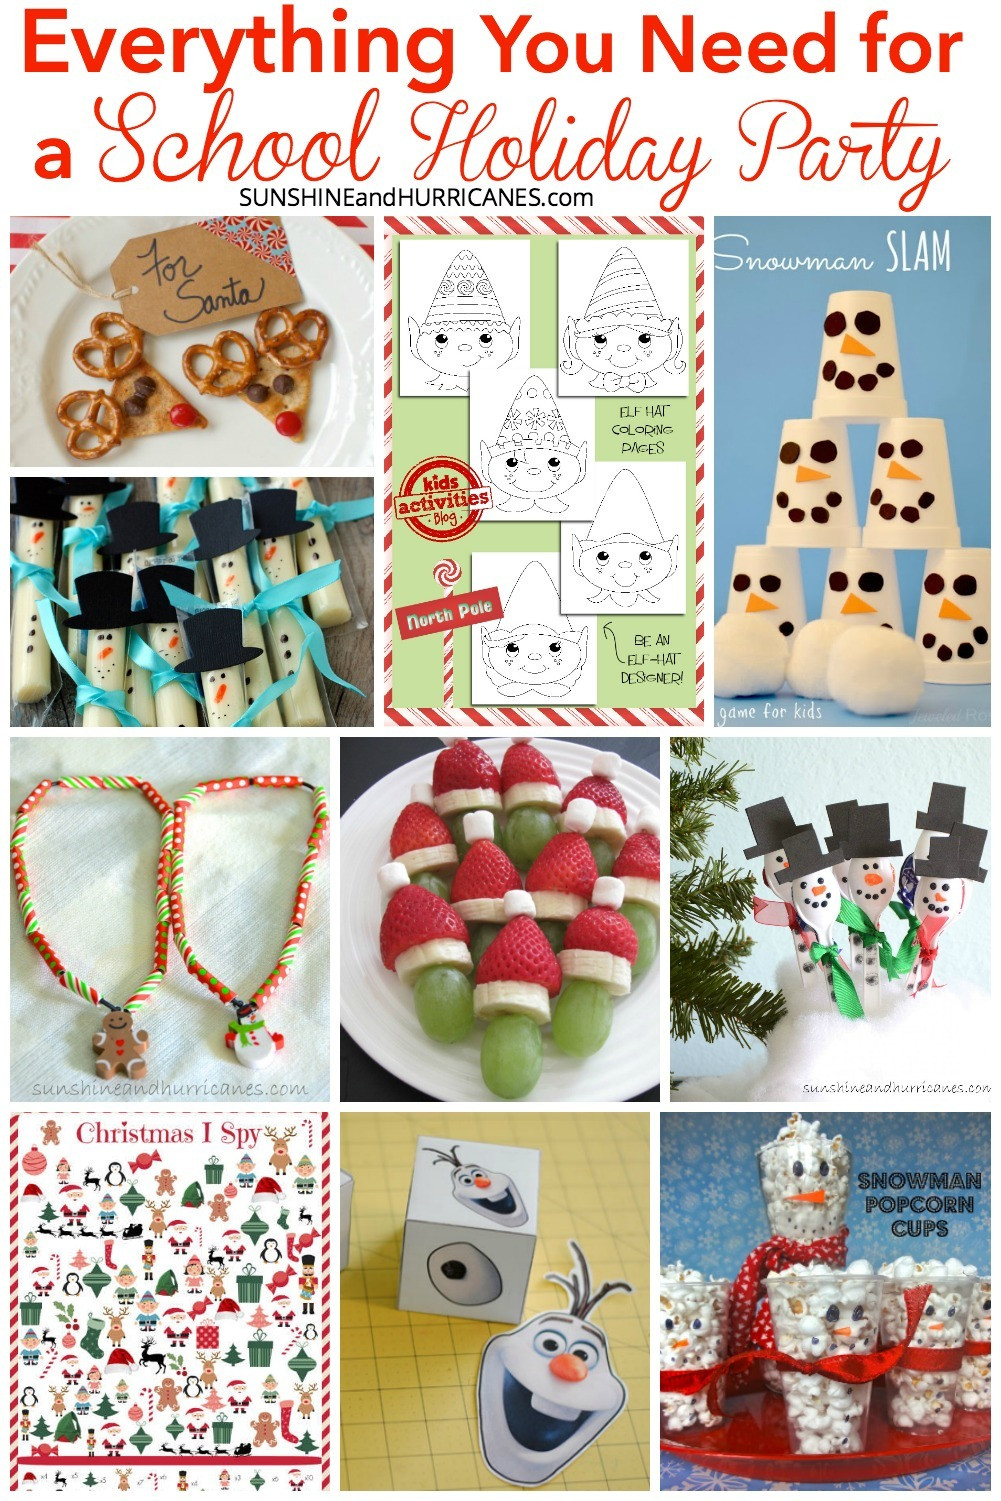 School Holiday Party Food Ideas
 Everything You Need To Totally Rock A School Holiday Party